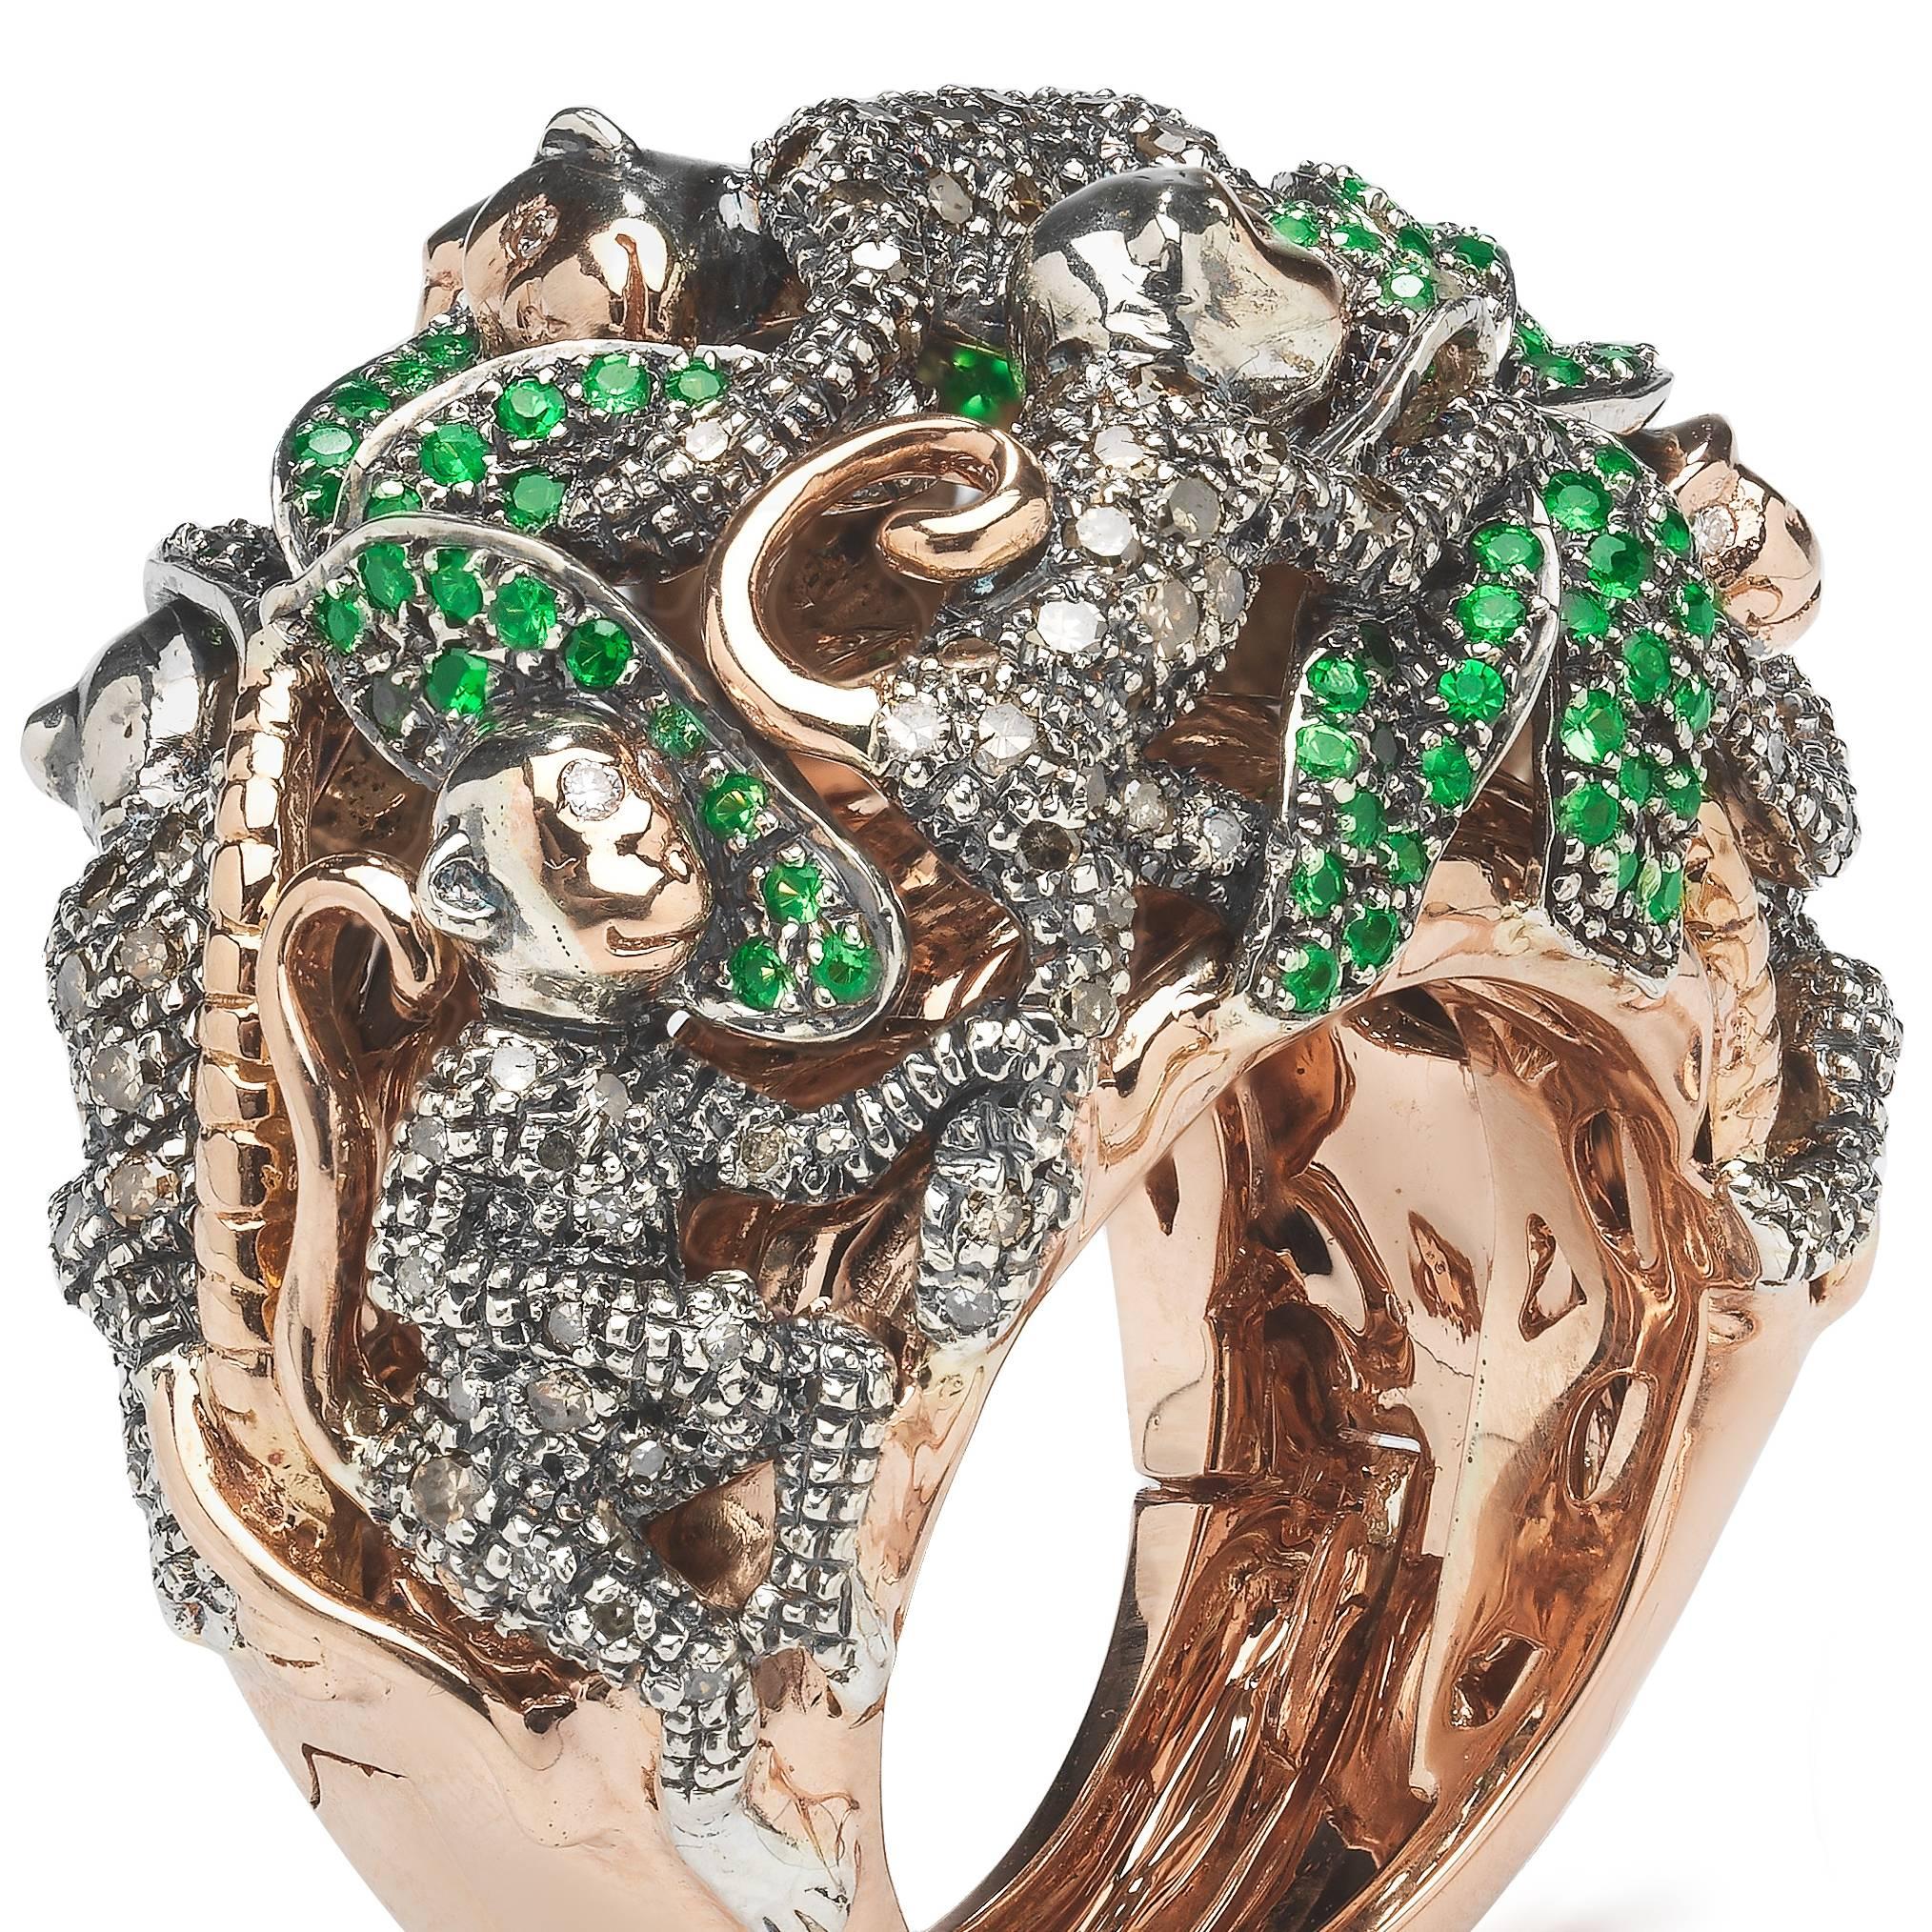 The Monkey Ring-in-a-Ring is a statement ring by Bibi van der Velden, using a technique she developed that allows you to open the bottom of the bigger ring to remove a smaller ring inside. The big ring, depicting playful monkeys and palm trees, is